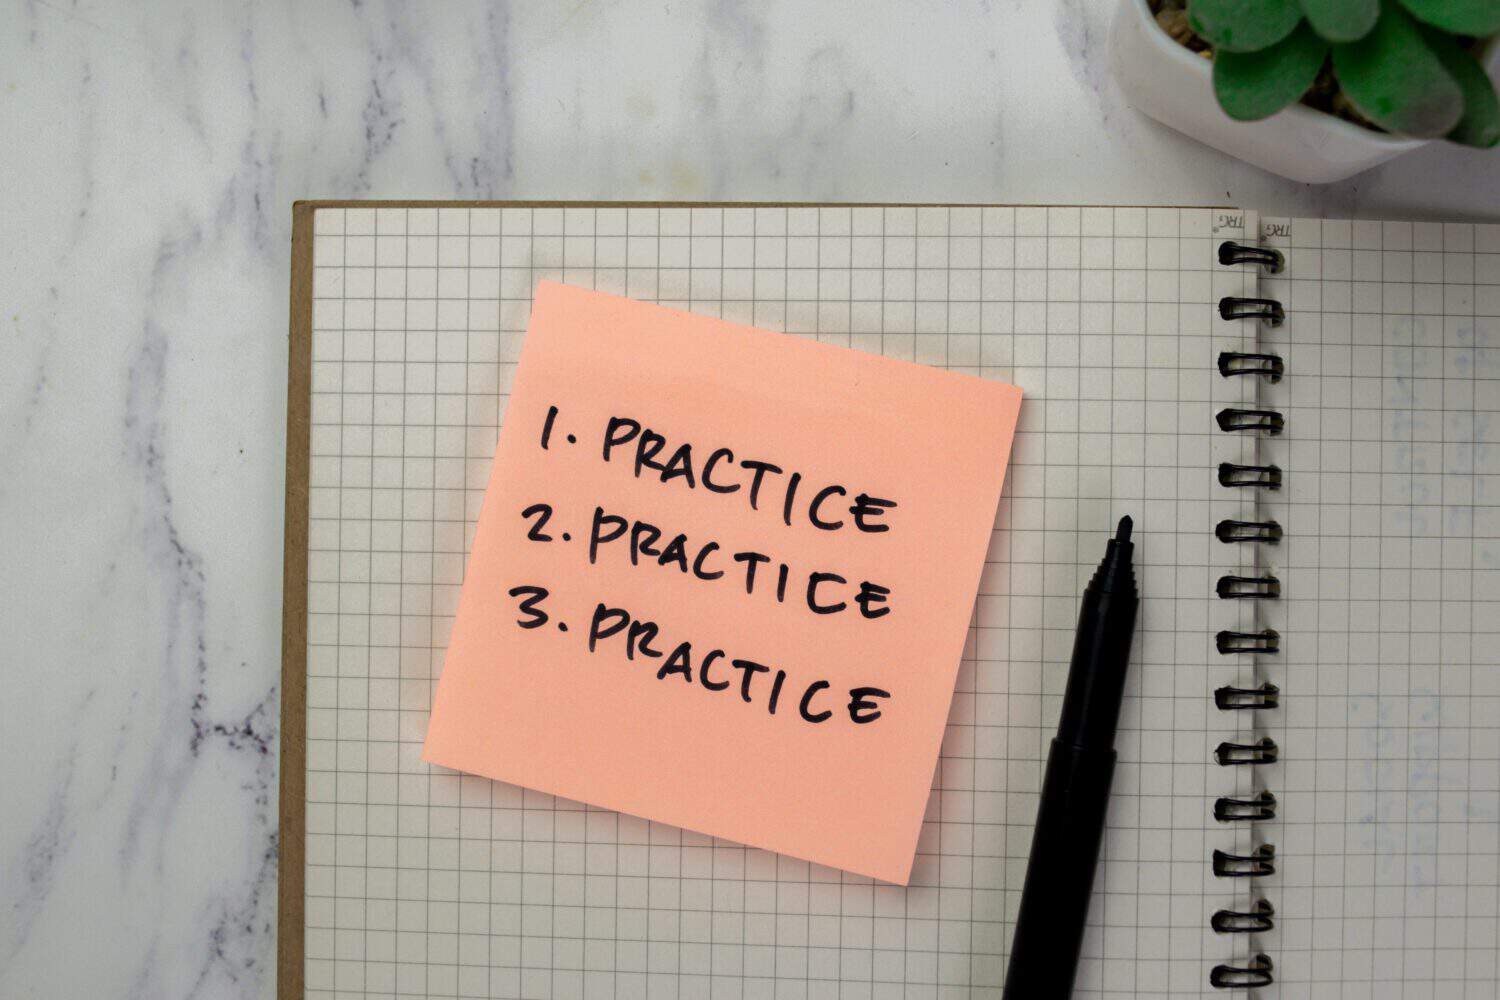 Concept of Practice, Practice, Practice write on sticky notes isolated on Wooden Table.